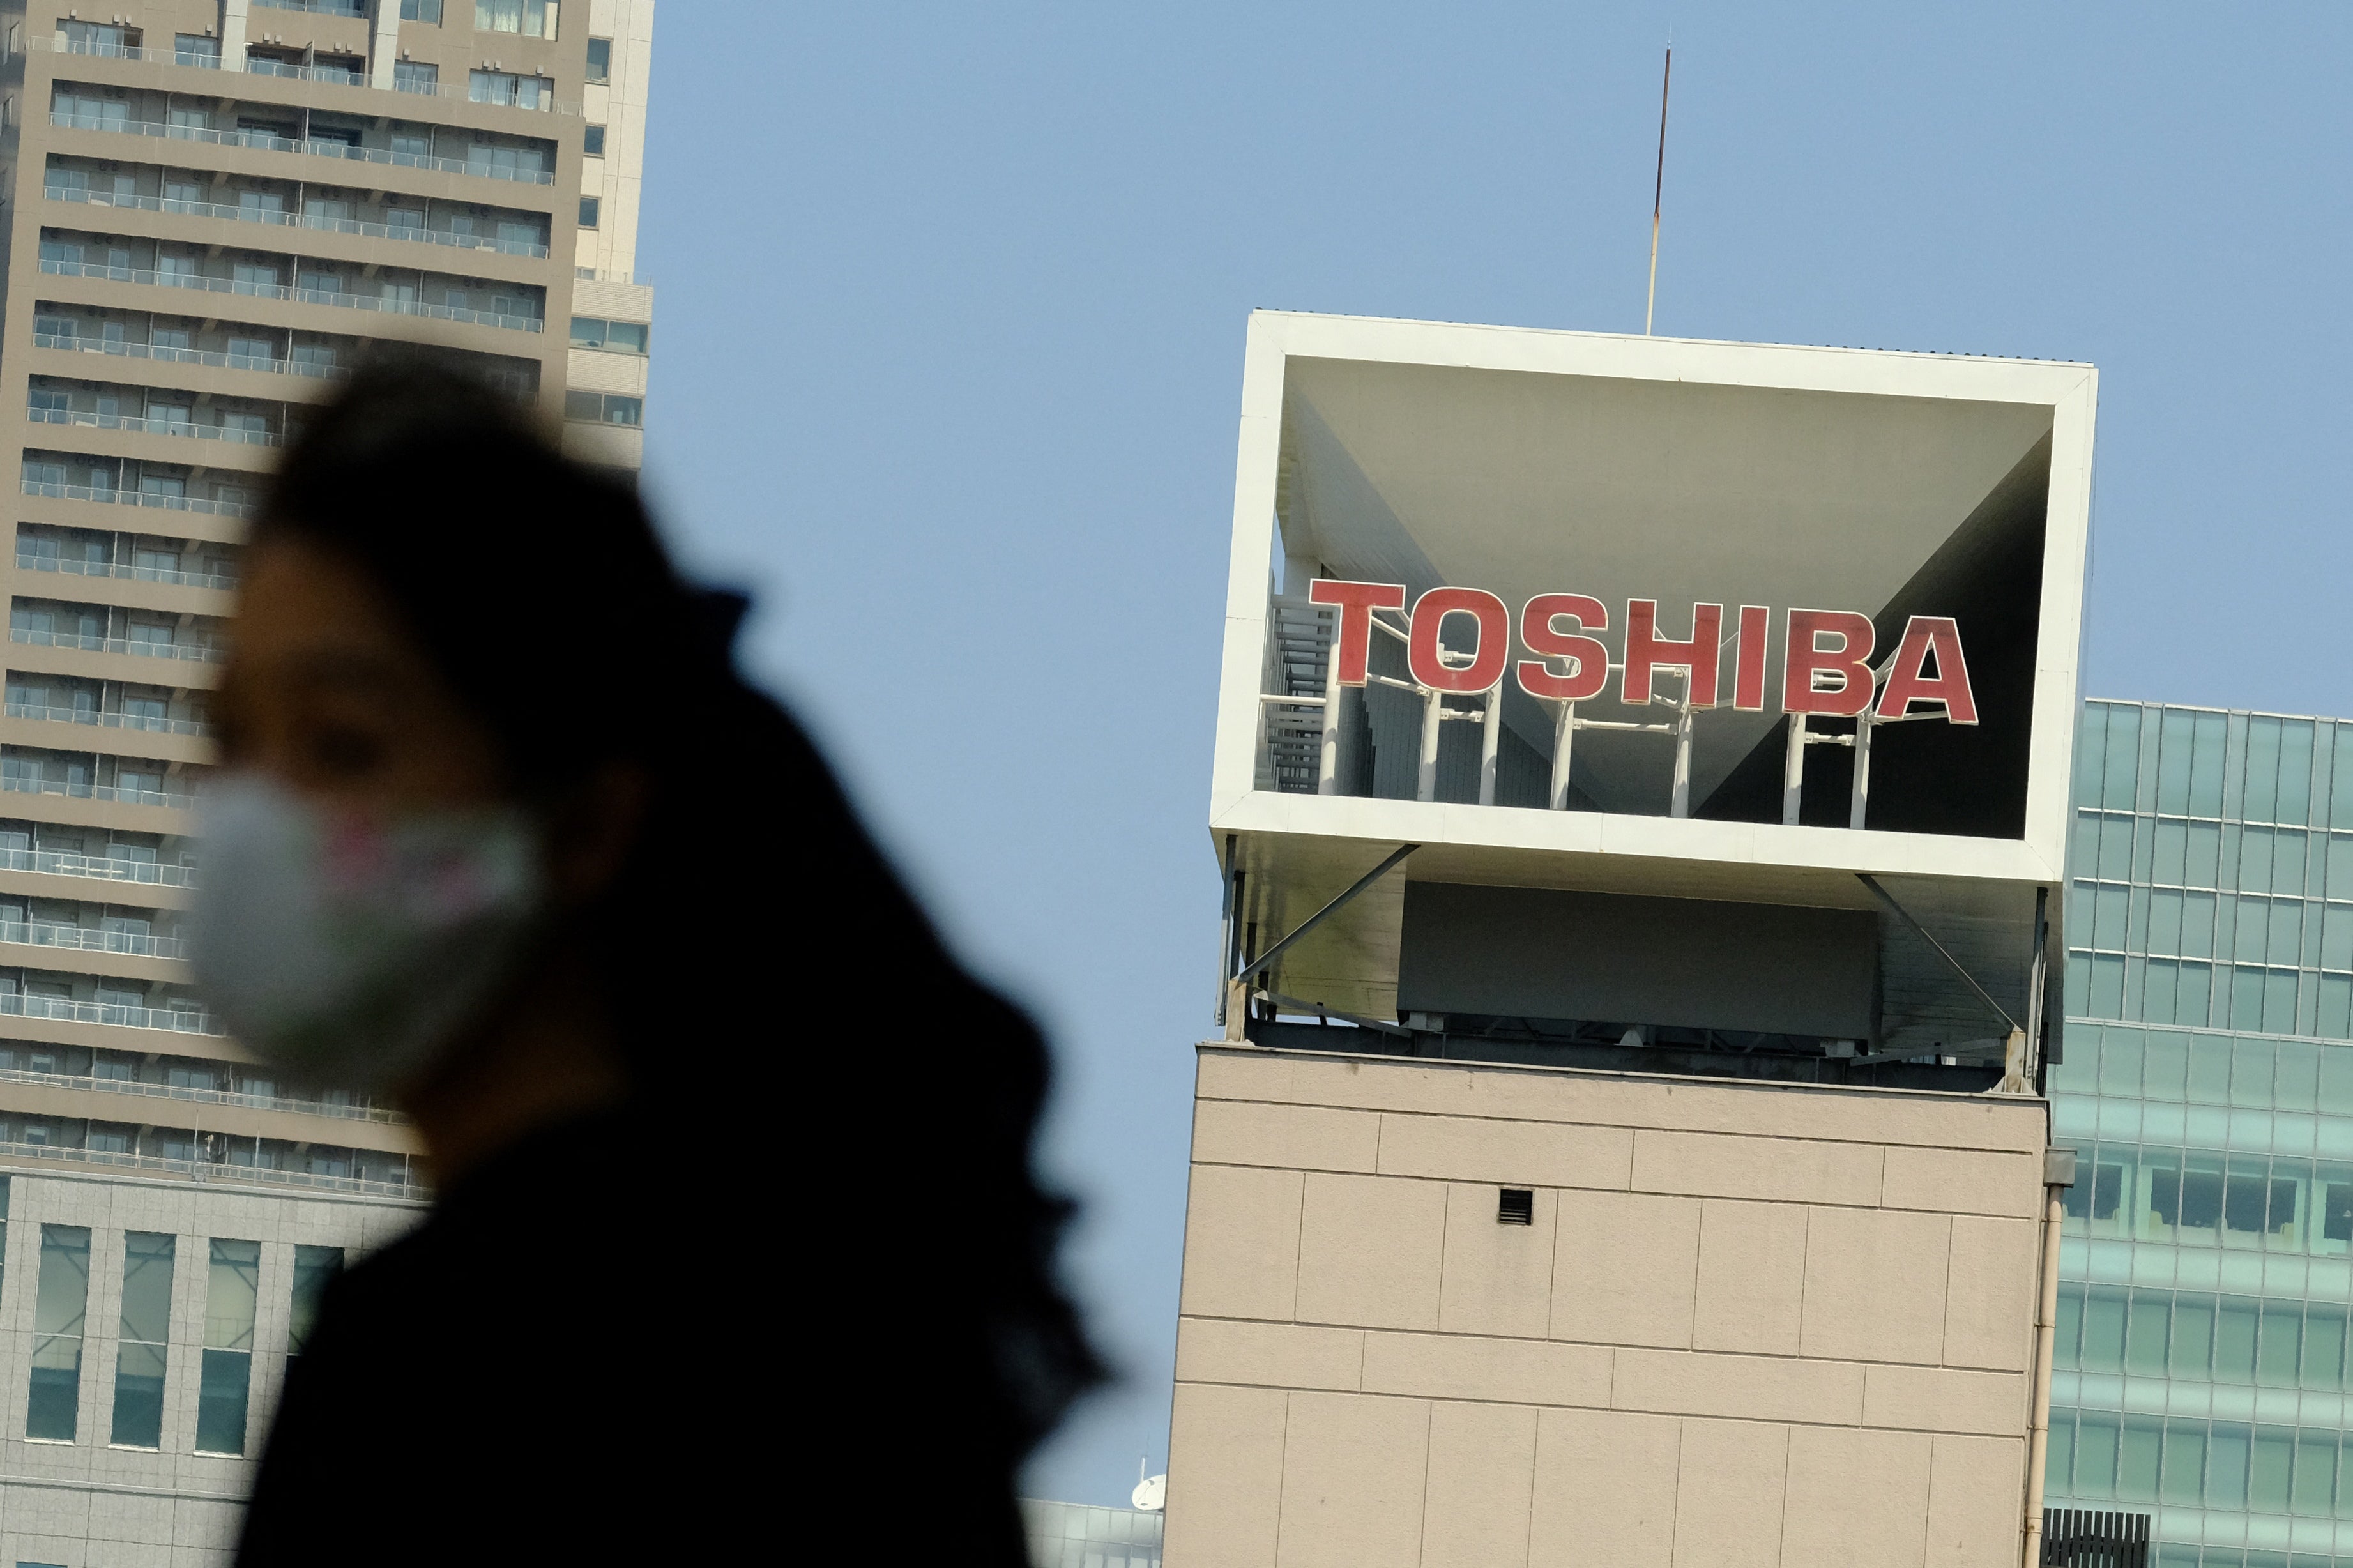 Toshiba has received a buyout offer of $20bn from CVC Capital Partners